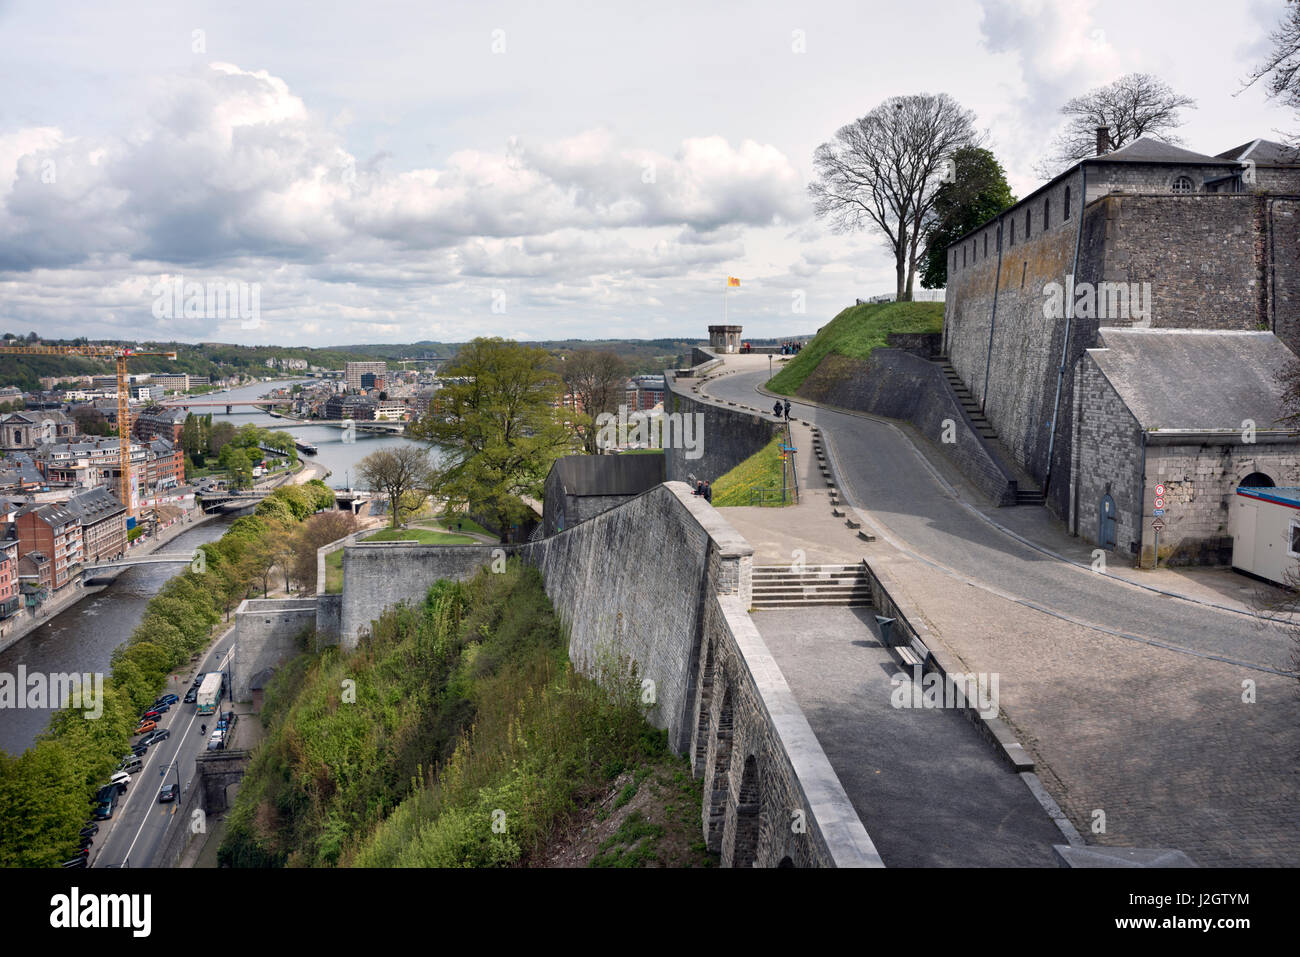 The historic city of Namur and the River Meuse, Belgium, seen from the fortifications of the Citadel Stock Photo